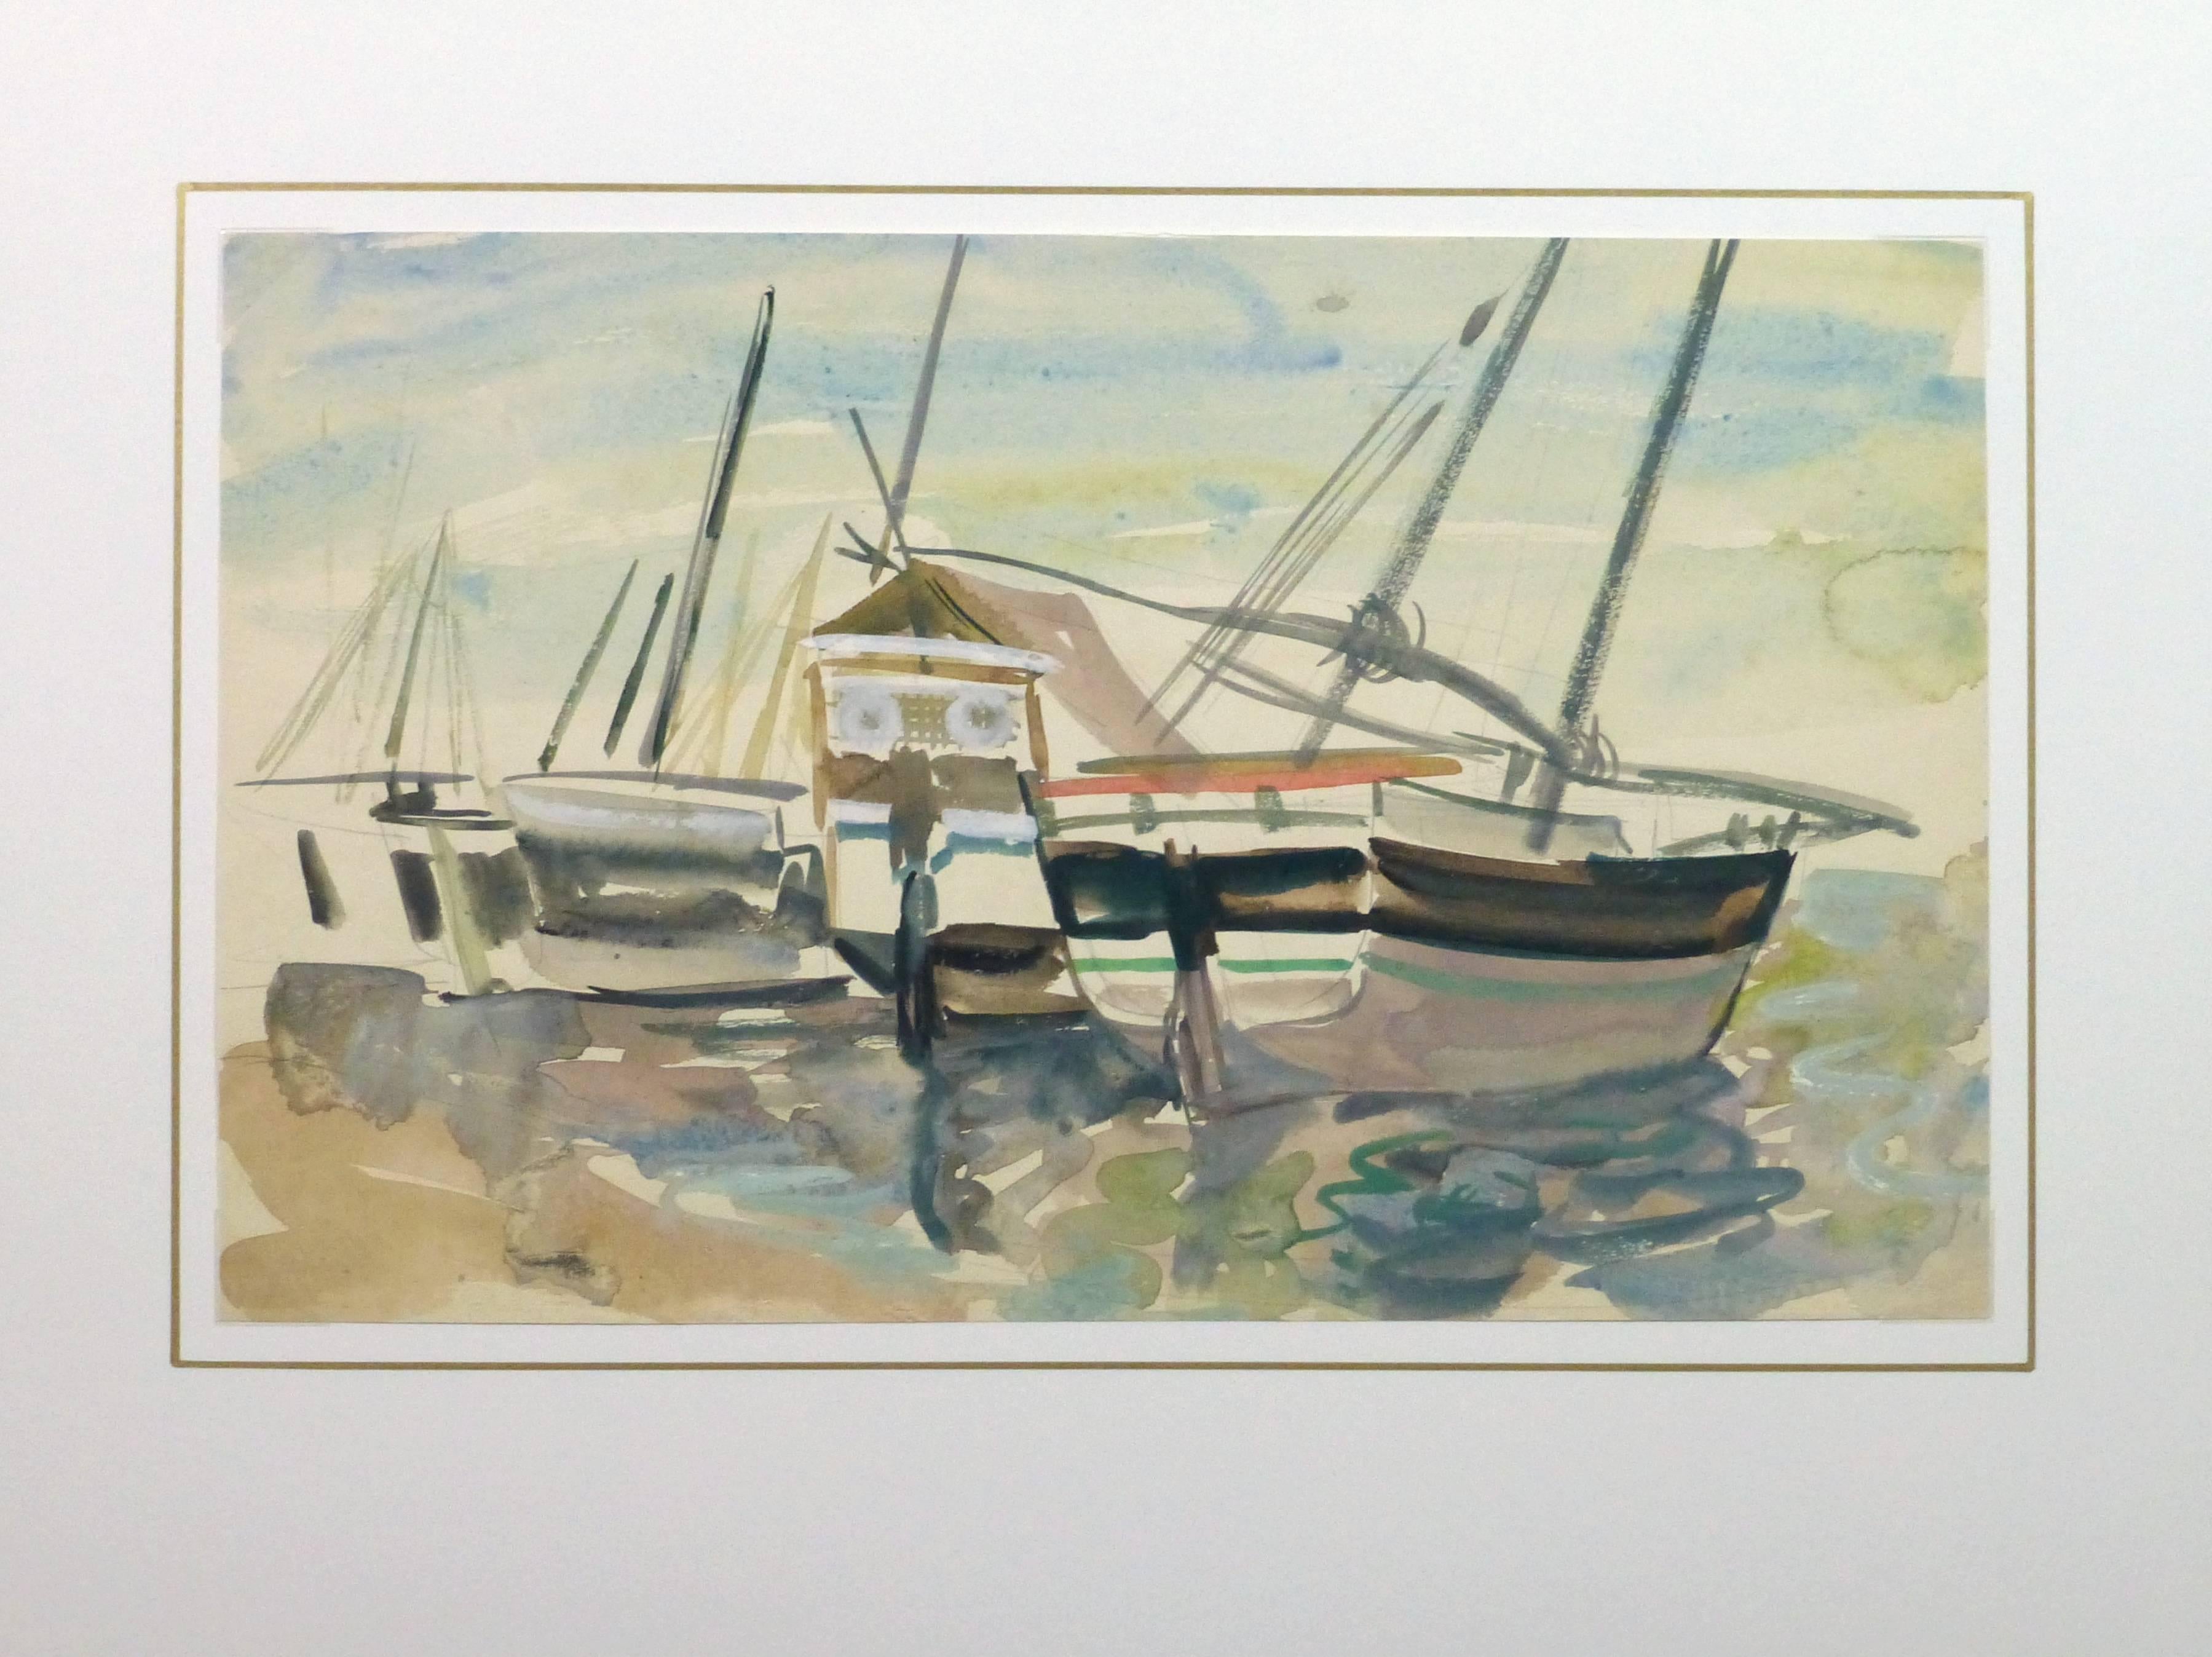 Cheerful watercolor of several sun dappled boats near the shore by French artist Stéphane Magnard, circa 1950.

Original one-of-a-kind artwork on paper displayed on a white mat with a gold border. Mat fits a standard-size frame. Archival plastic